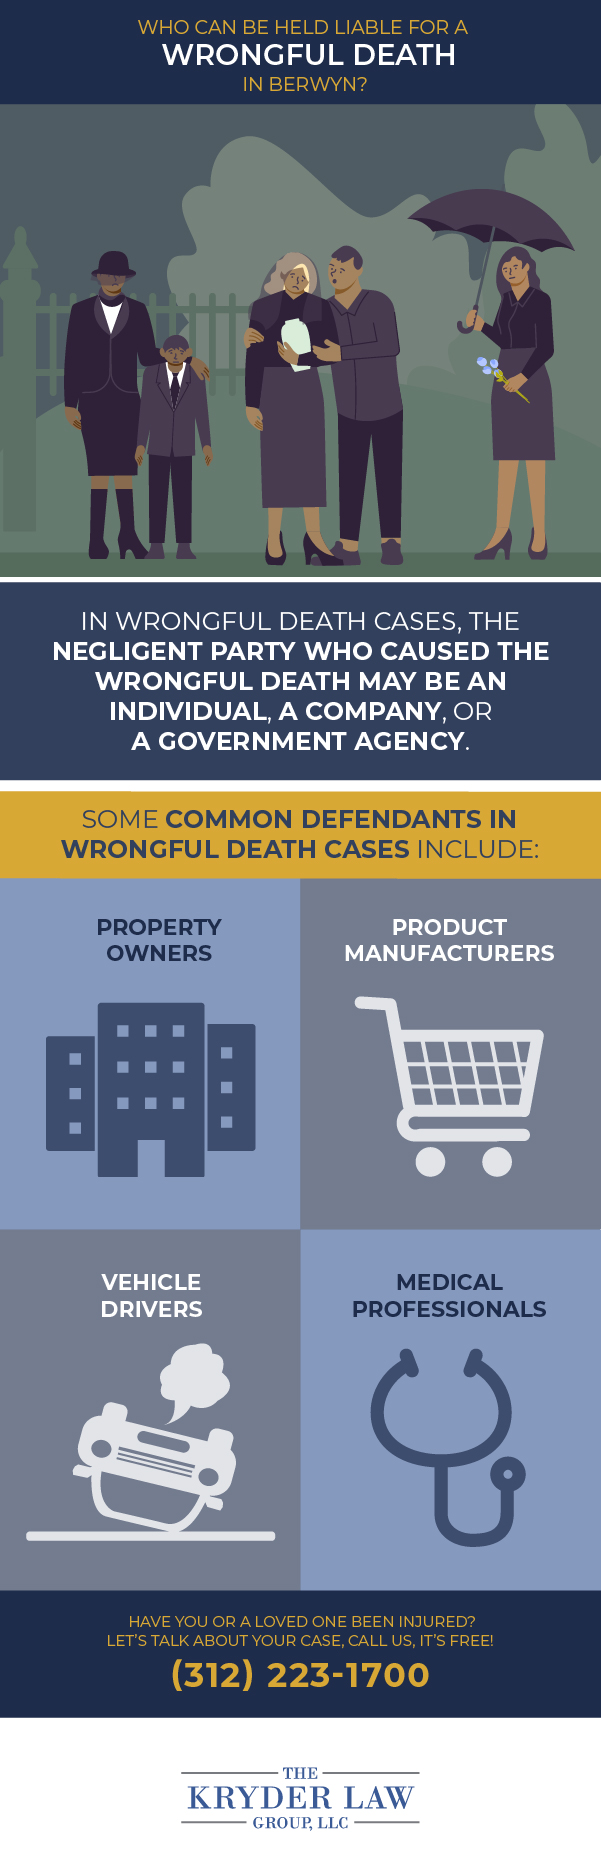 The Benefits of Hiring a Berwyn Wrongful Death Lawyer Infographic